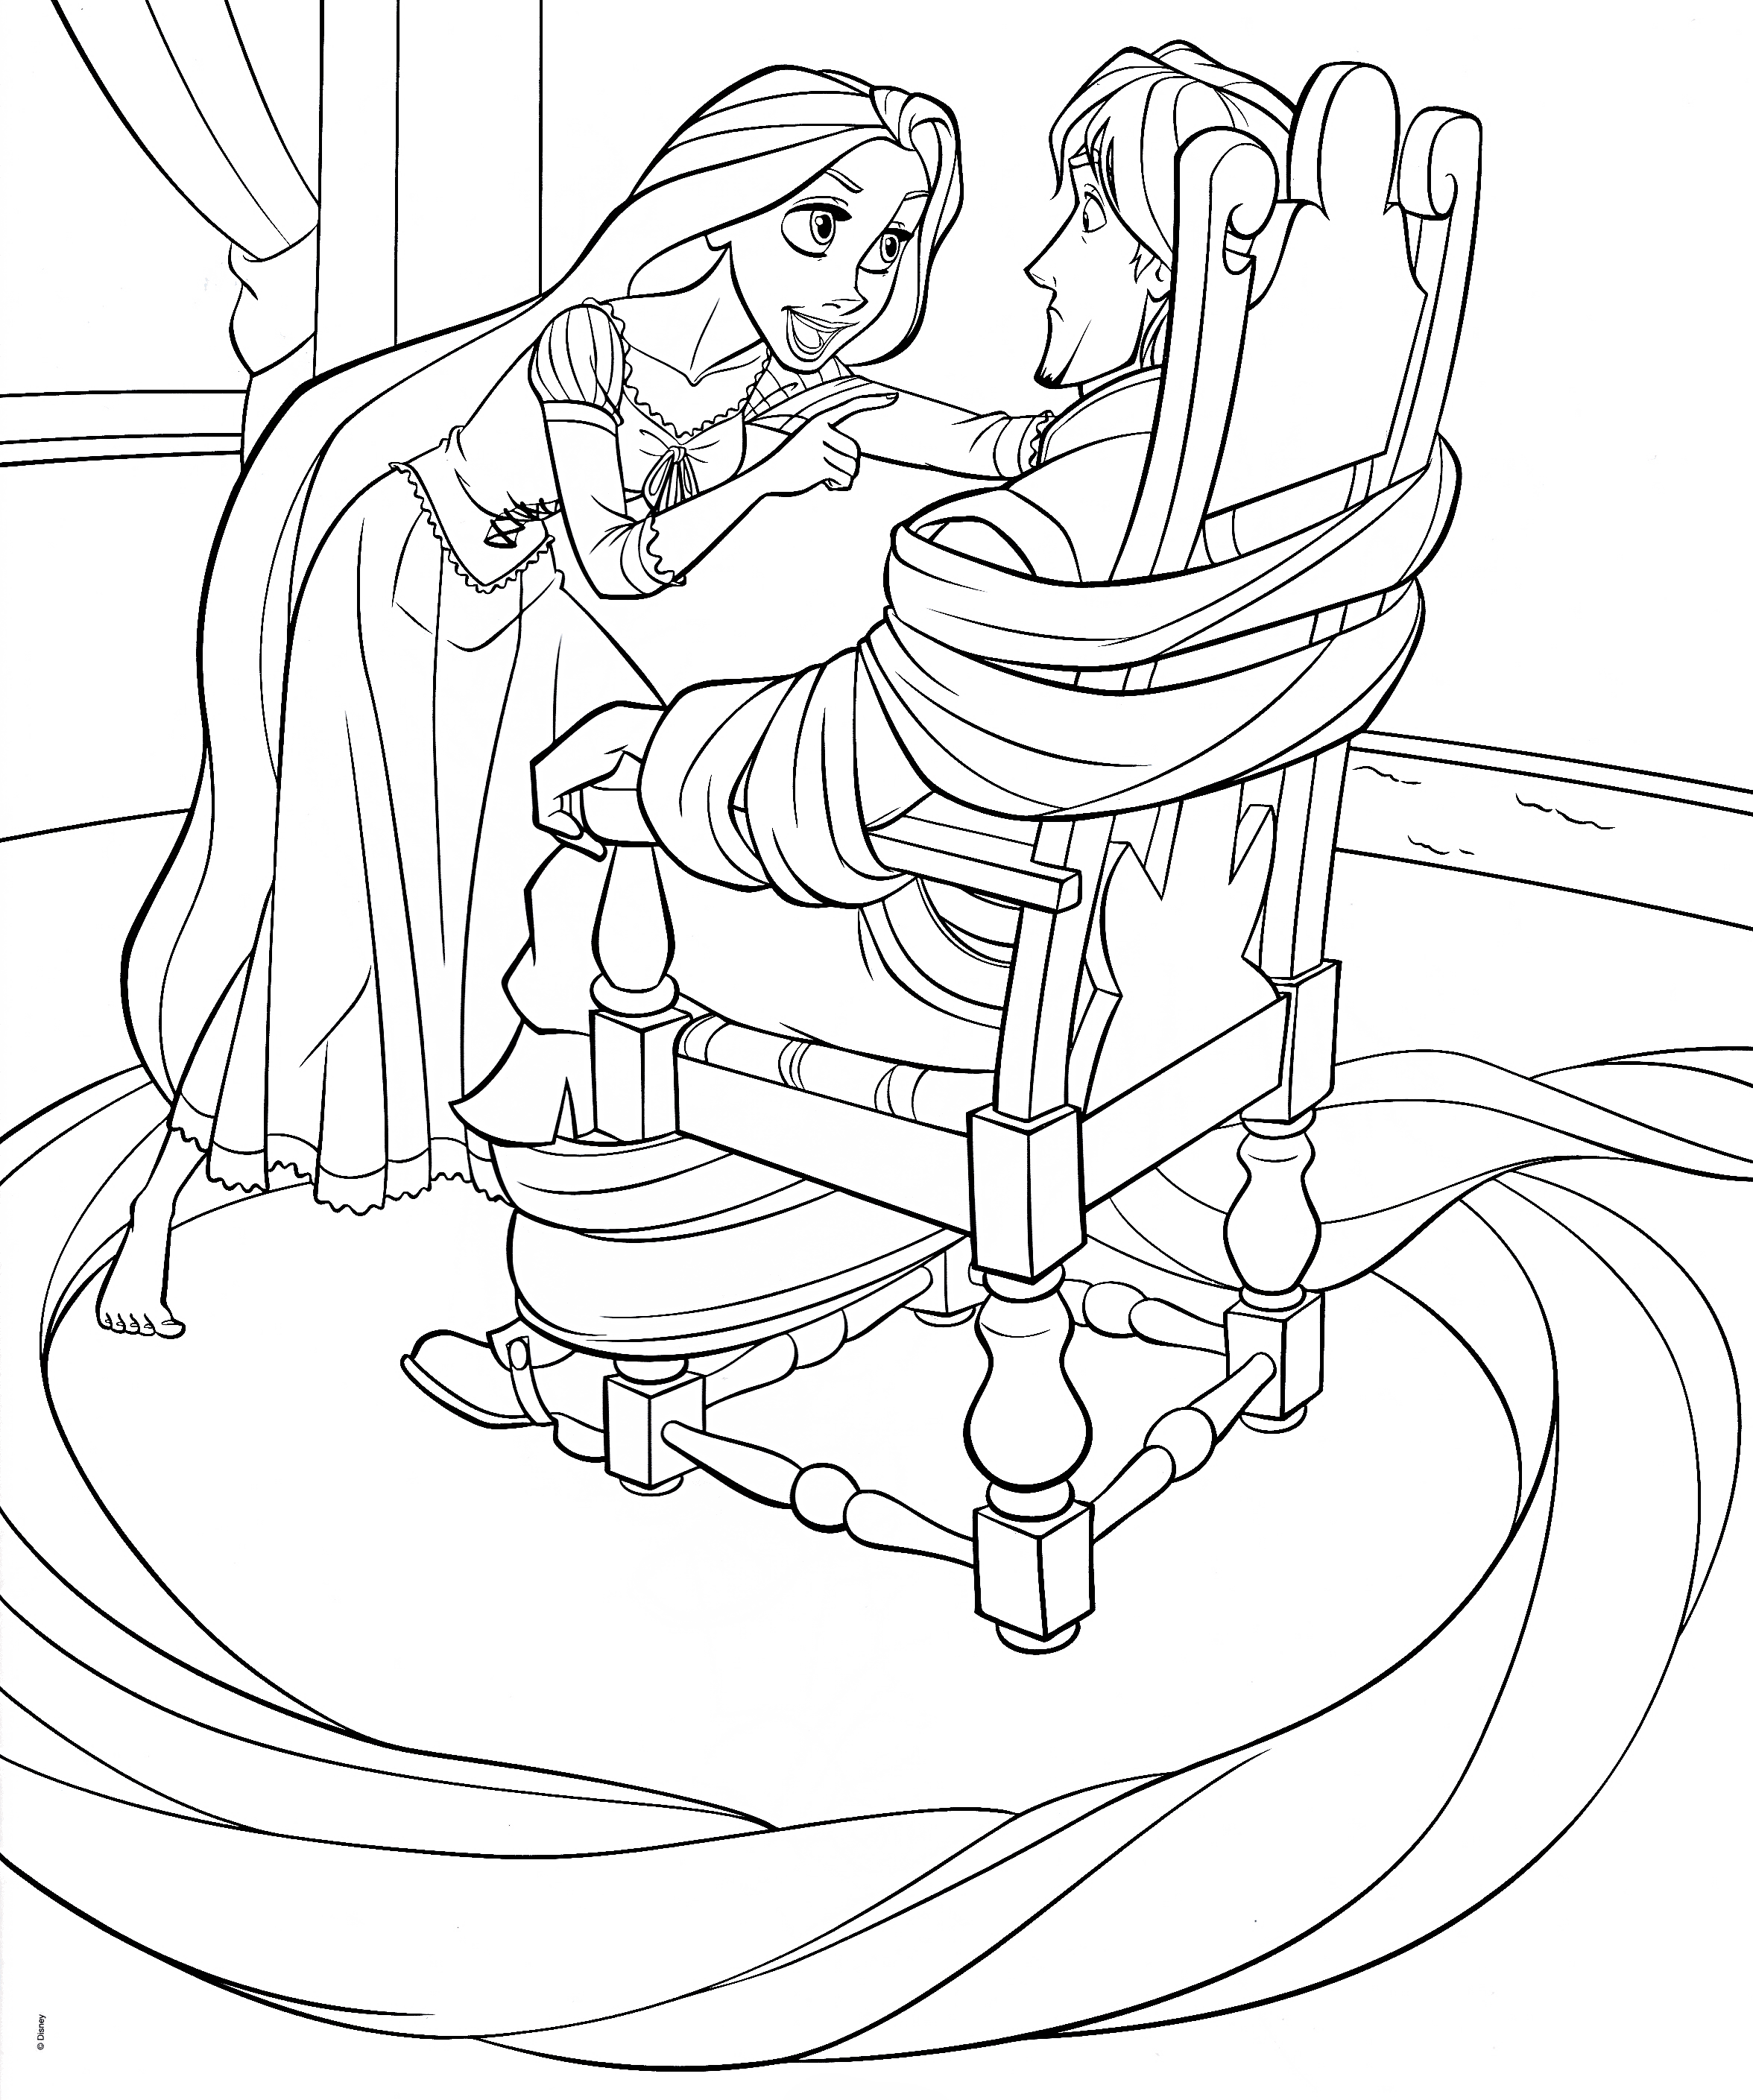 Rapunzel ties up Flynn Coloring Pages